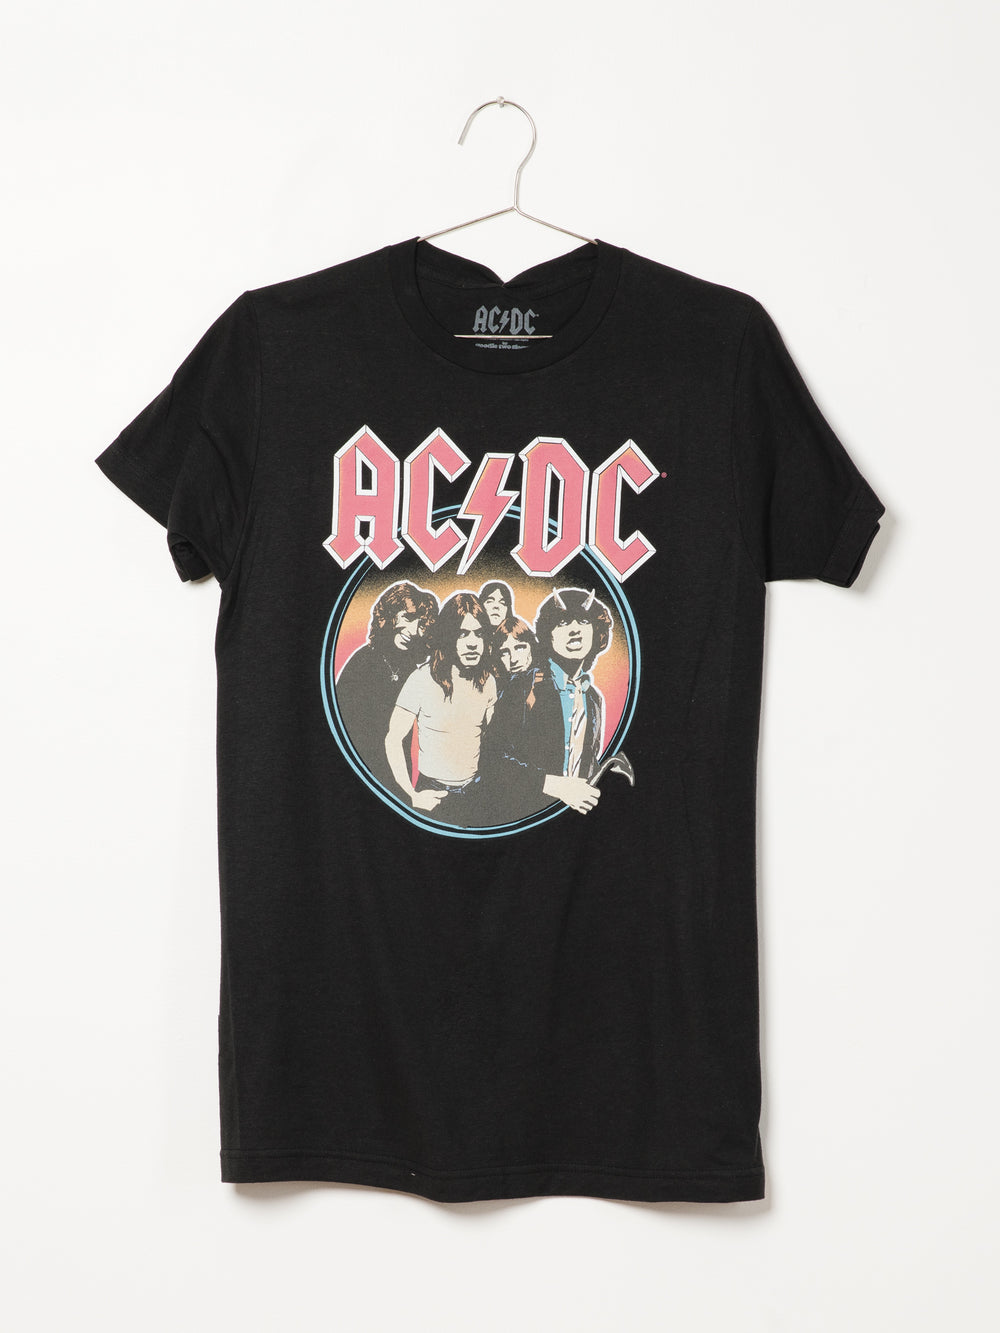 GOODIE TWO SLEEVE AC/DC AQUATINT T-SHIRT  - CLEARANCE